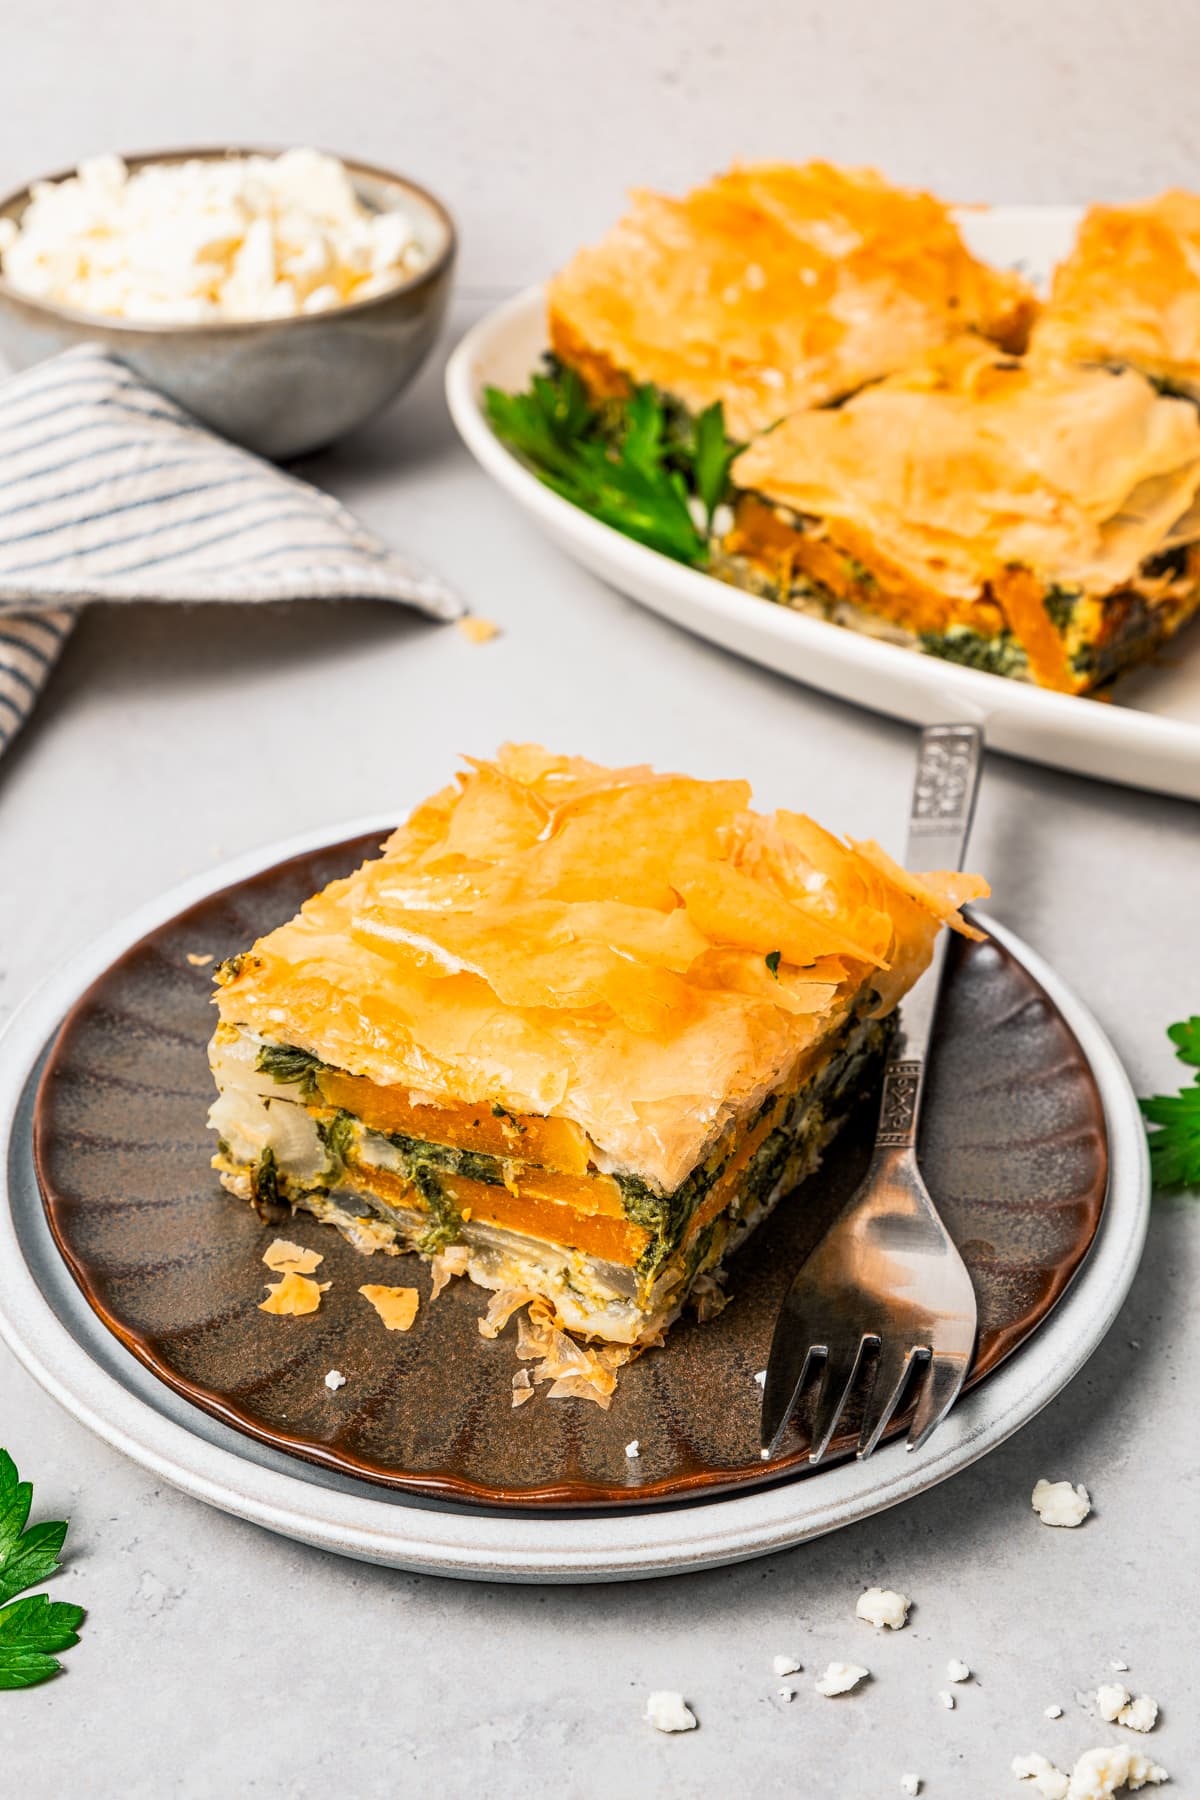 A slice of butternut squash and spinach pie on a plate next to a fork, with additional slices of pie on a platter in the background.